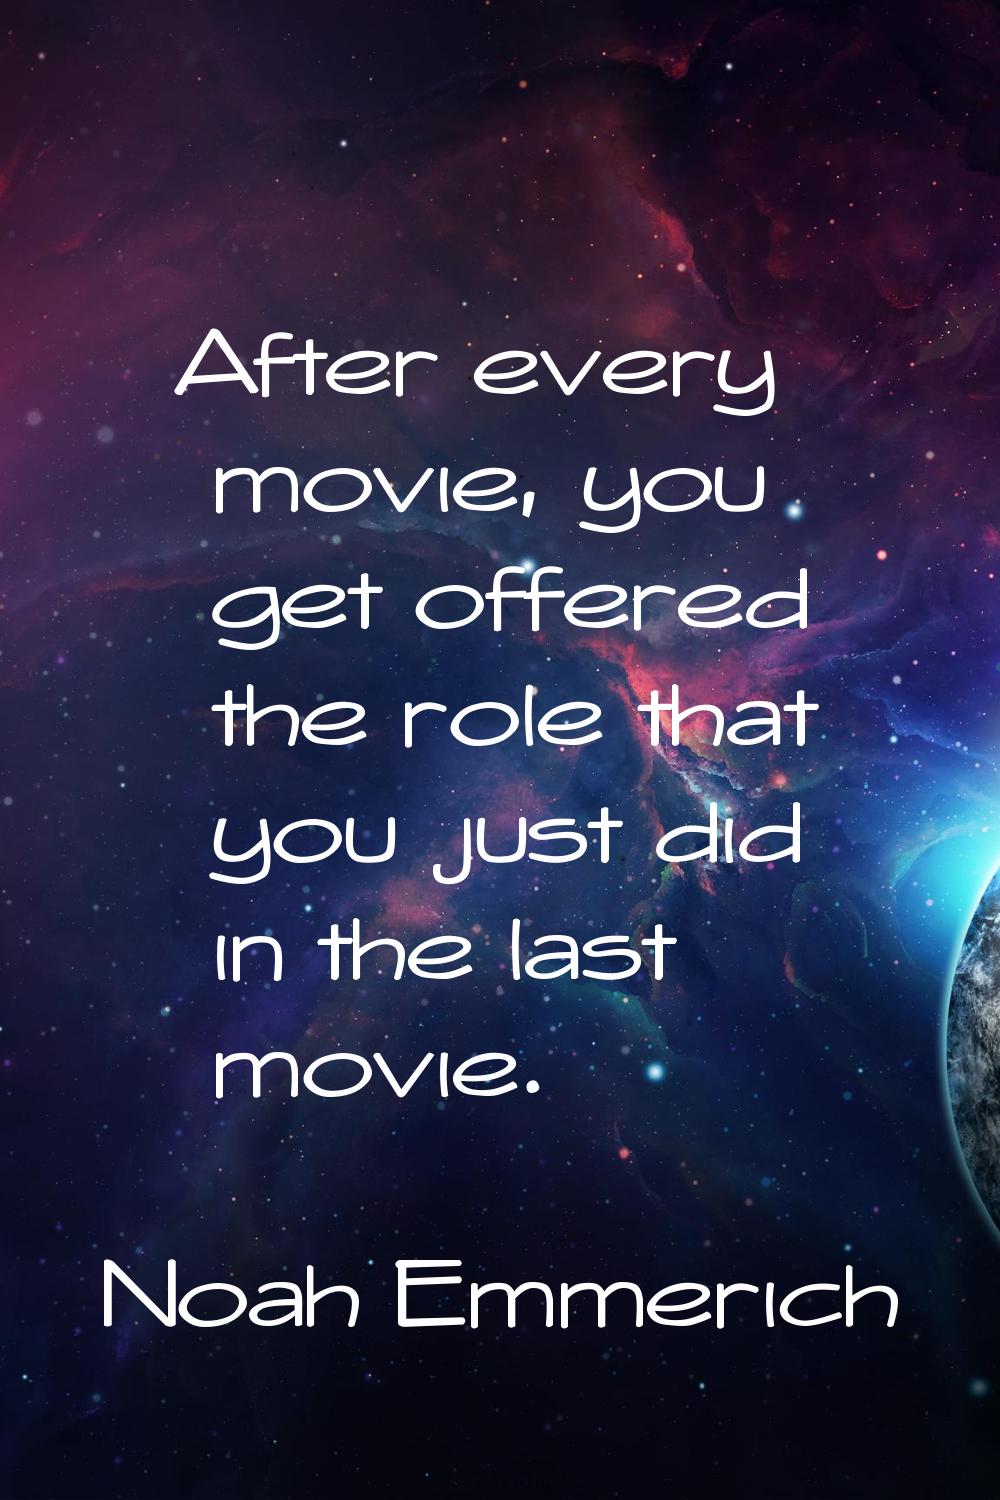 After every movie, you get offered the role that you just did in the last movie.